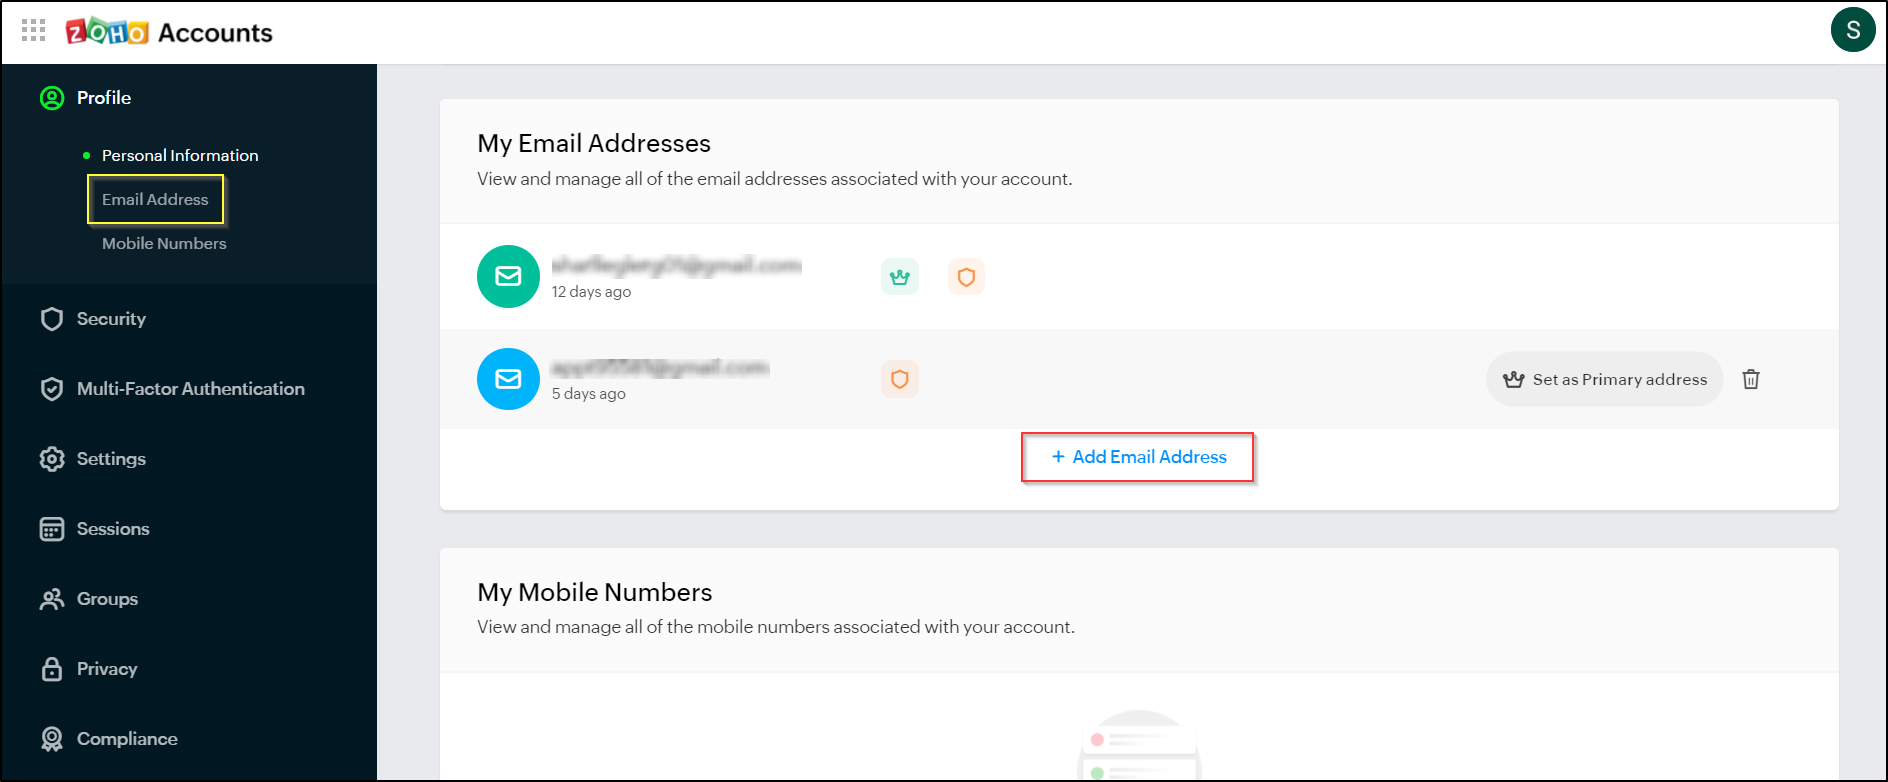 Adding a new email address to Zoho account